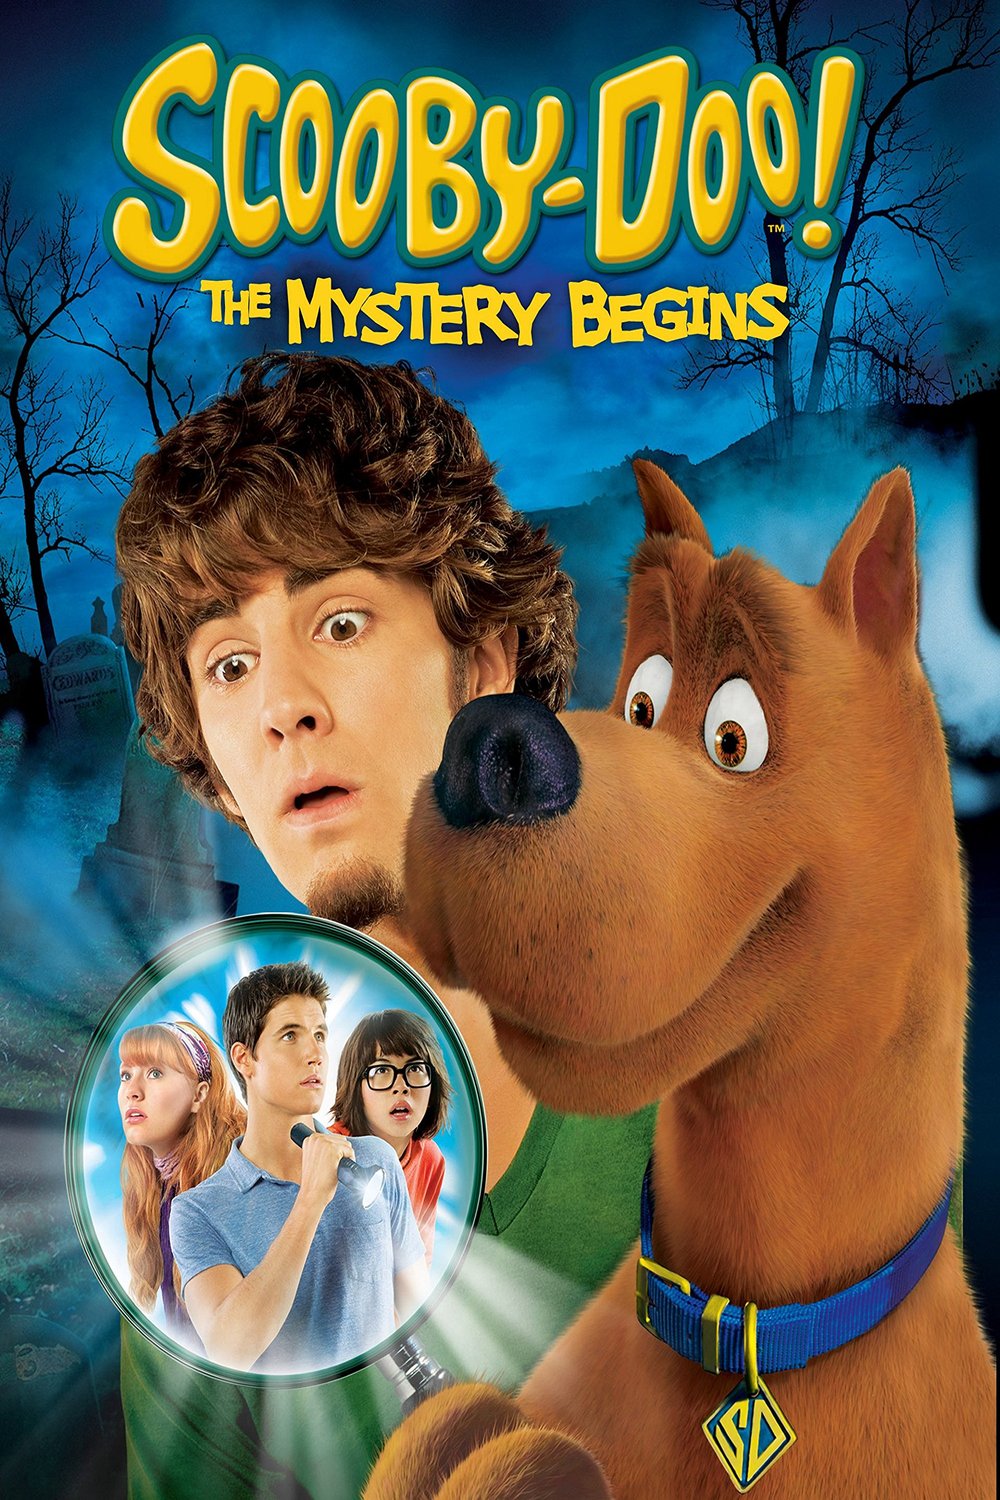 L'affiche du film Scooby-Doo! The Mystery Begins